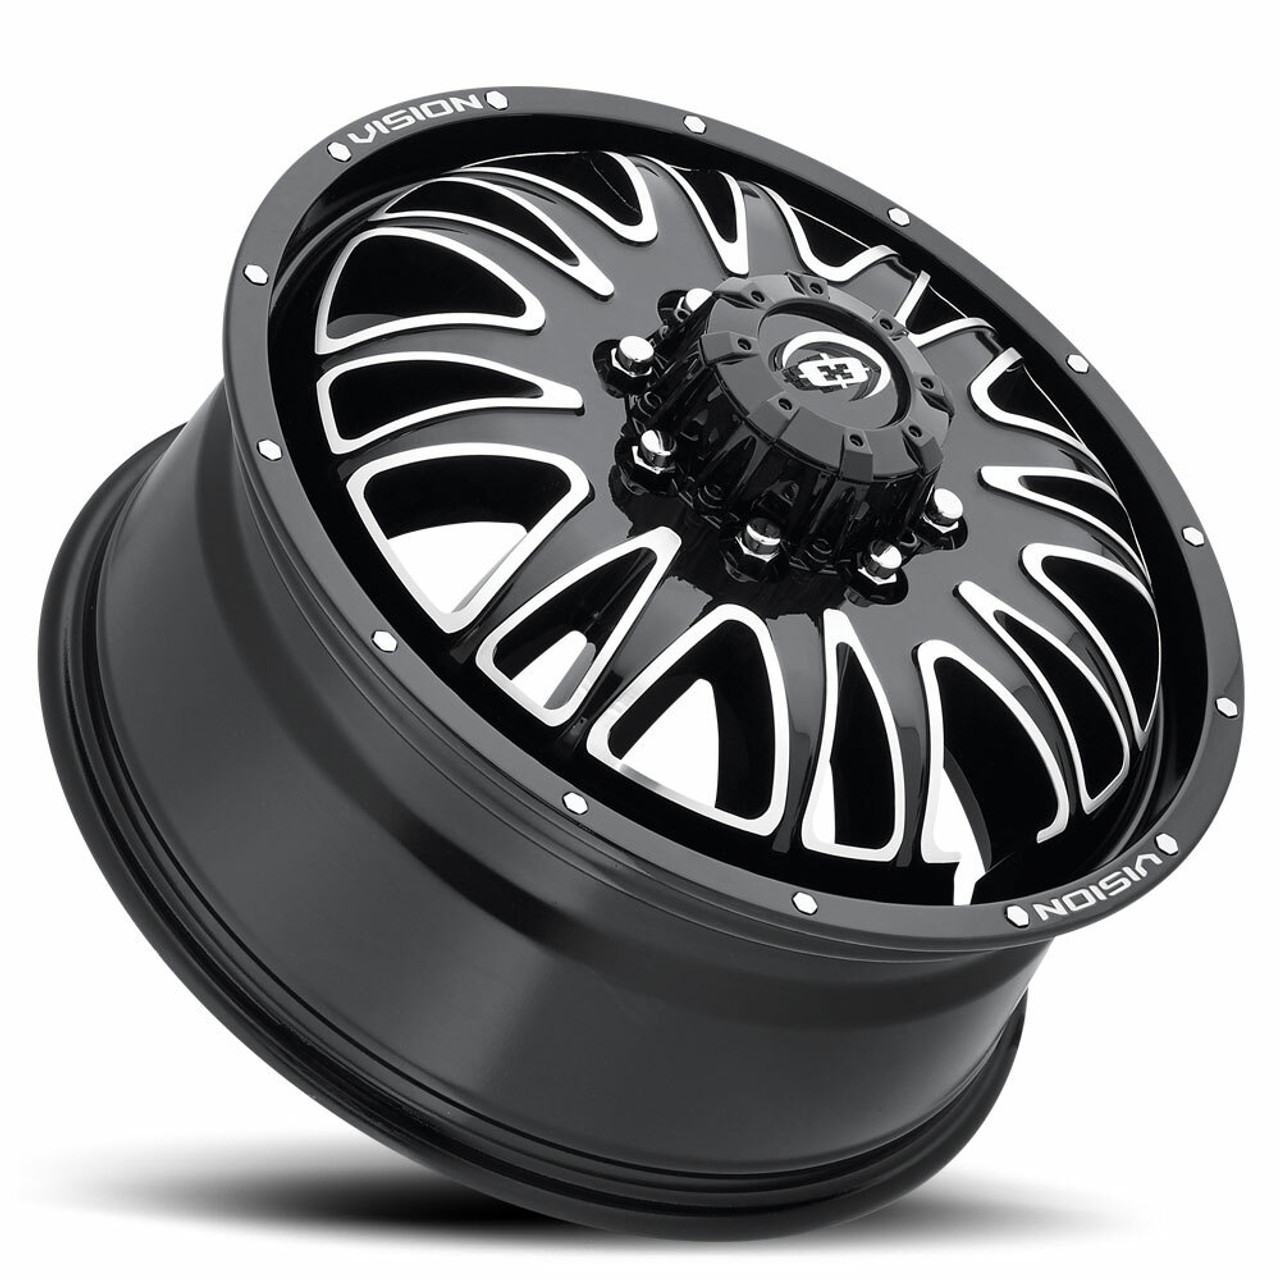 20" Vision HD 401 Rival Gloss Black Machined Front Wheel 20x8.25 8x210 105.5mm